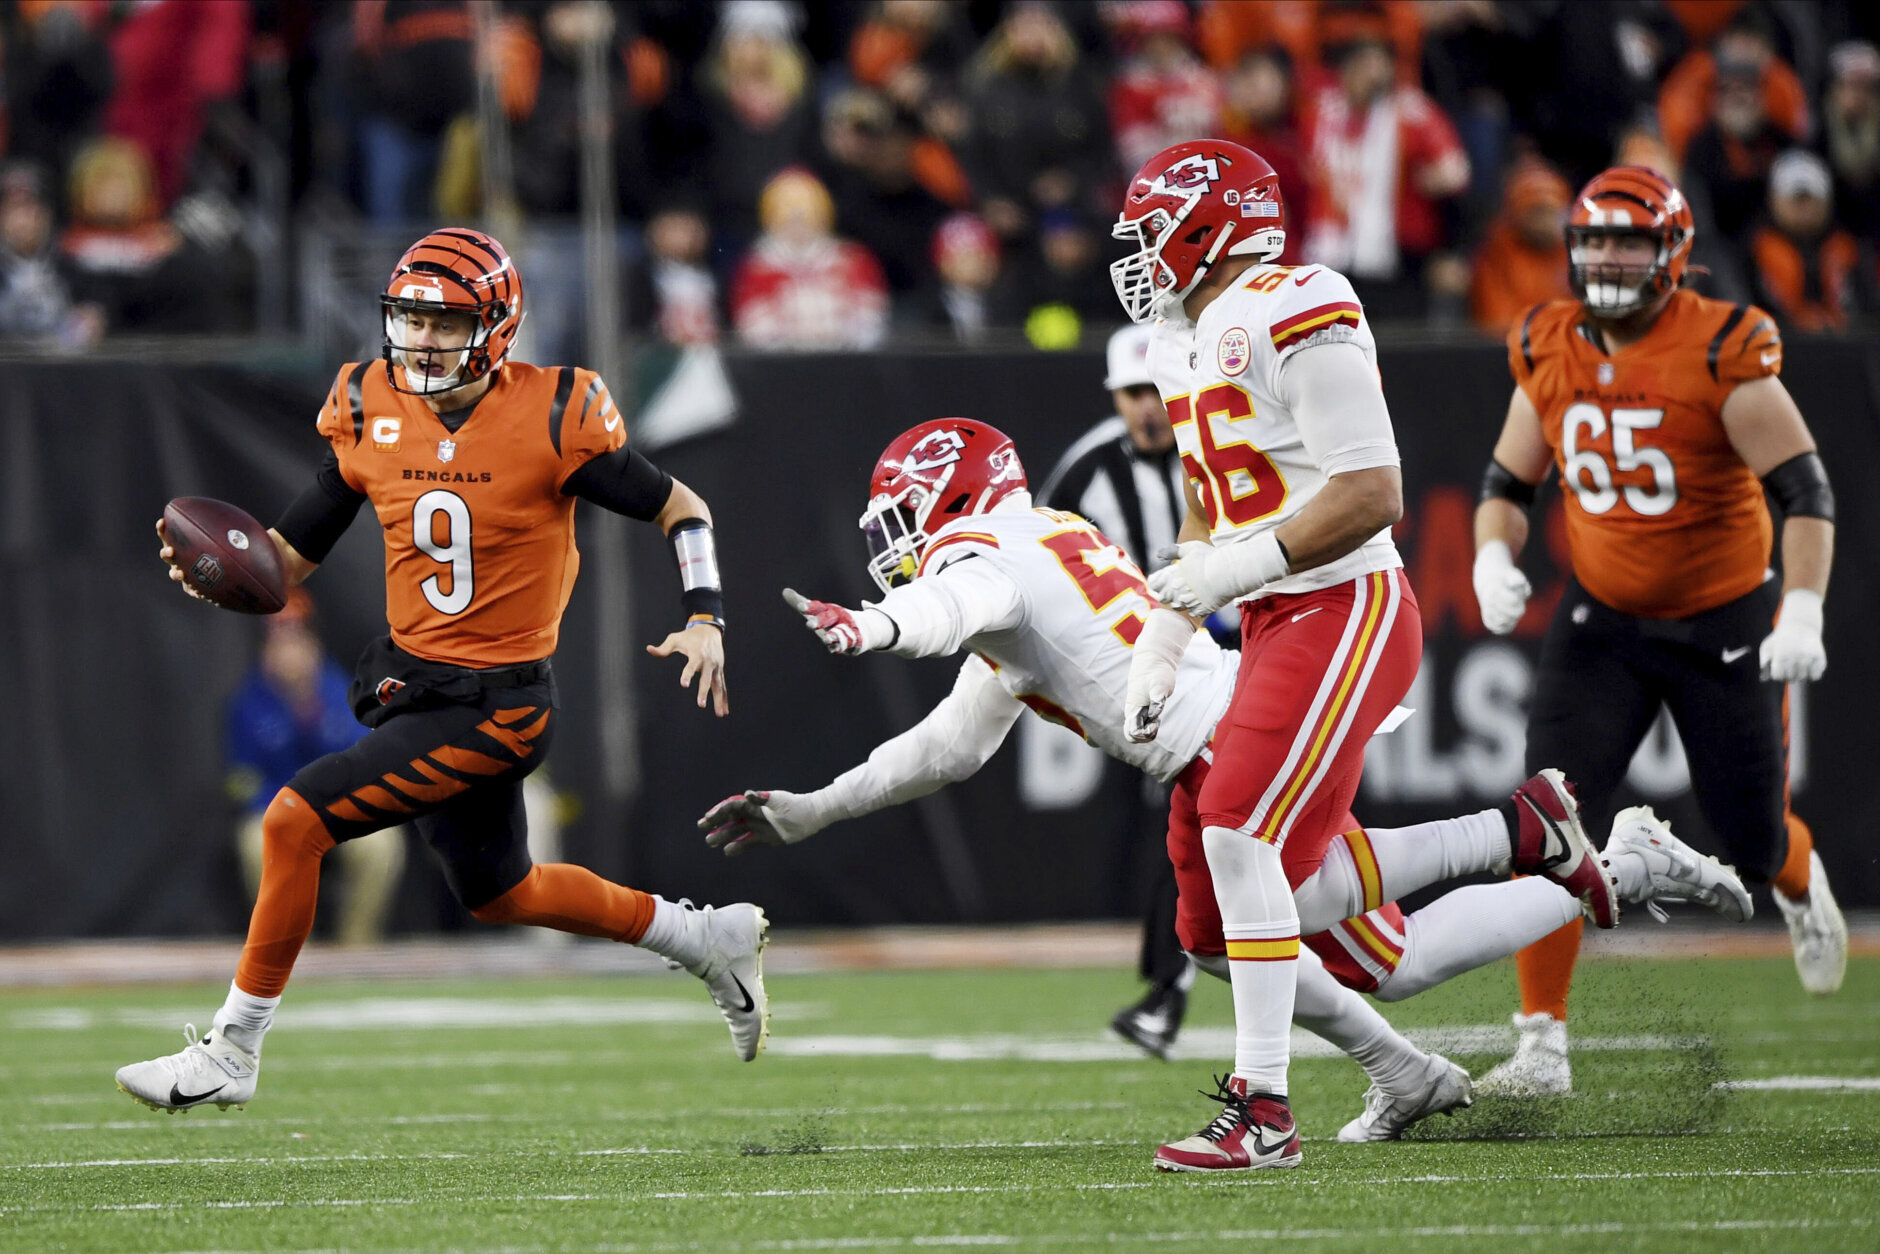 <p><em><strong>Chiefs 24</strong></em><br />
<em><strong>Bengals 27</strong></em></p>
<p>Kansas City reversed the second-half trend in this matchup — the Chiefs were outscored 34-6 in the second half of the last two losses to Cincinnati — but it still wasn&#8217;t enough to win in the Queen City for the first time since 1984. The Bengals have won six of seven against the Chiefs and Joe Burrow is clearly Patrick Mahomes&#8217; kryptonite.</p>
